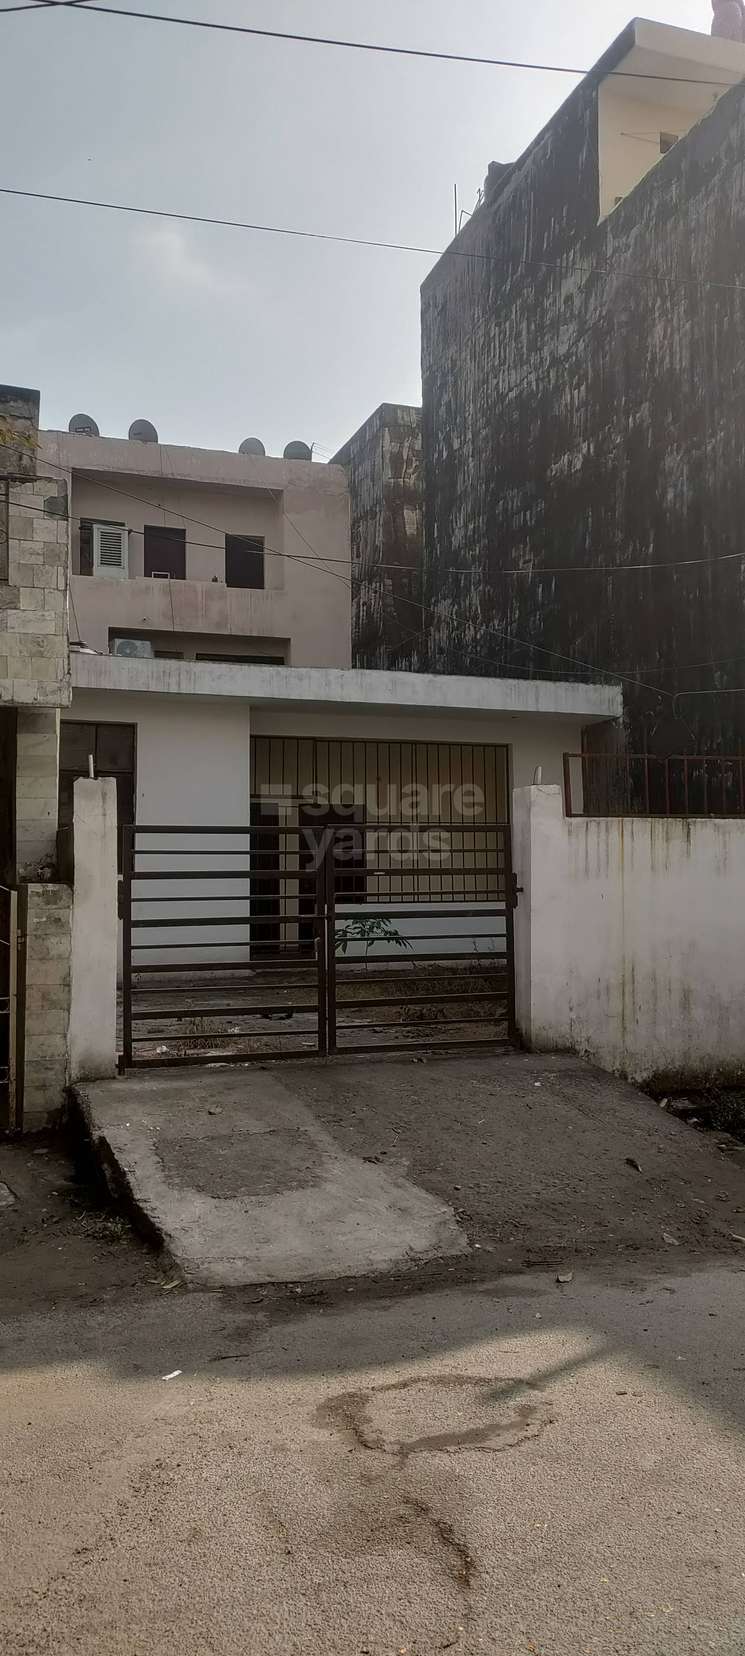 2 Bedroom 112 Sq.Mt. Independent House in Sector 12 Noida